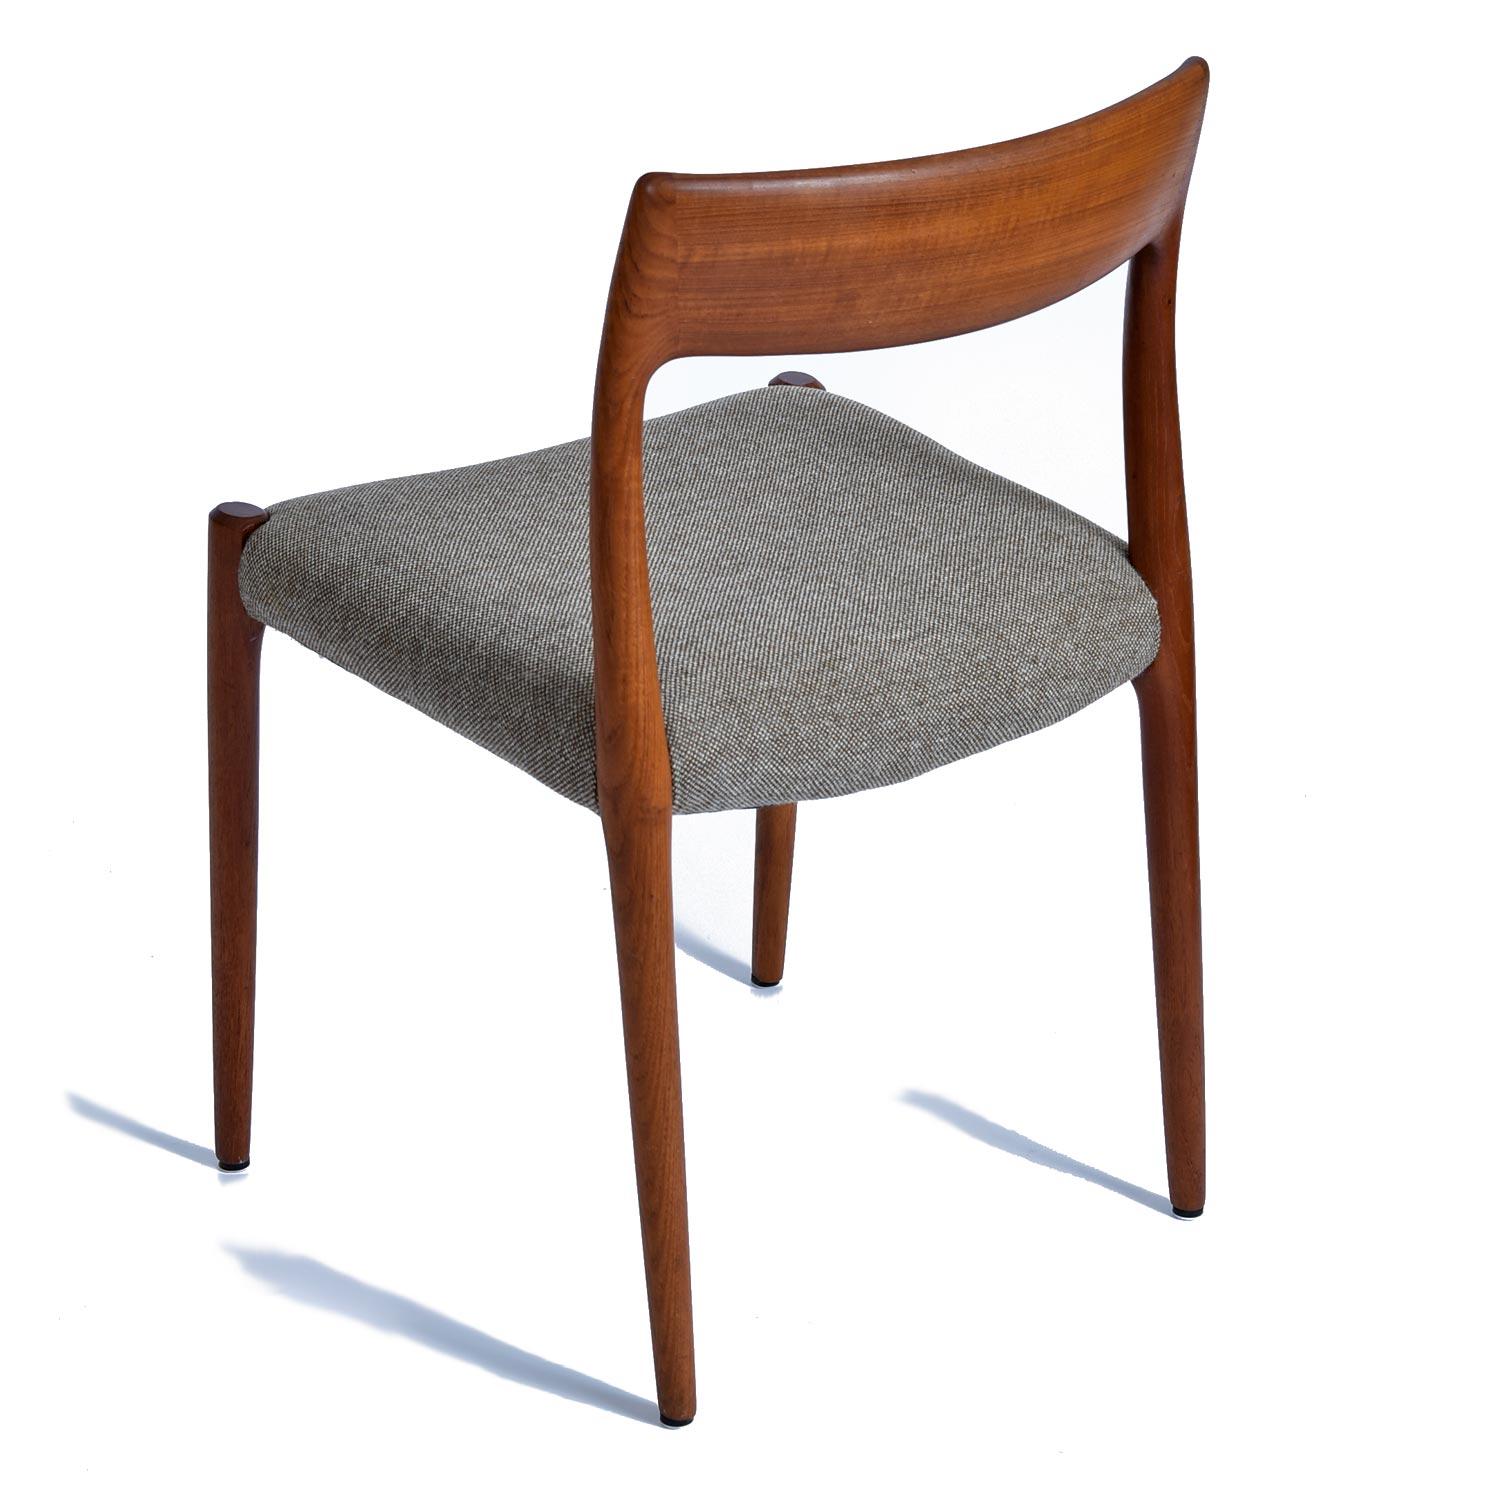 Six Danish dining chairs by Niels Otto Moller. These classics have become icons of Danish Modern design since their introduction by J.L. Moller. The set includes six model 75 chairs. All of the chairs feature newer fabric in excellent condition that